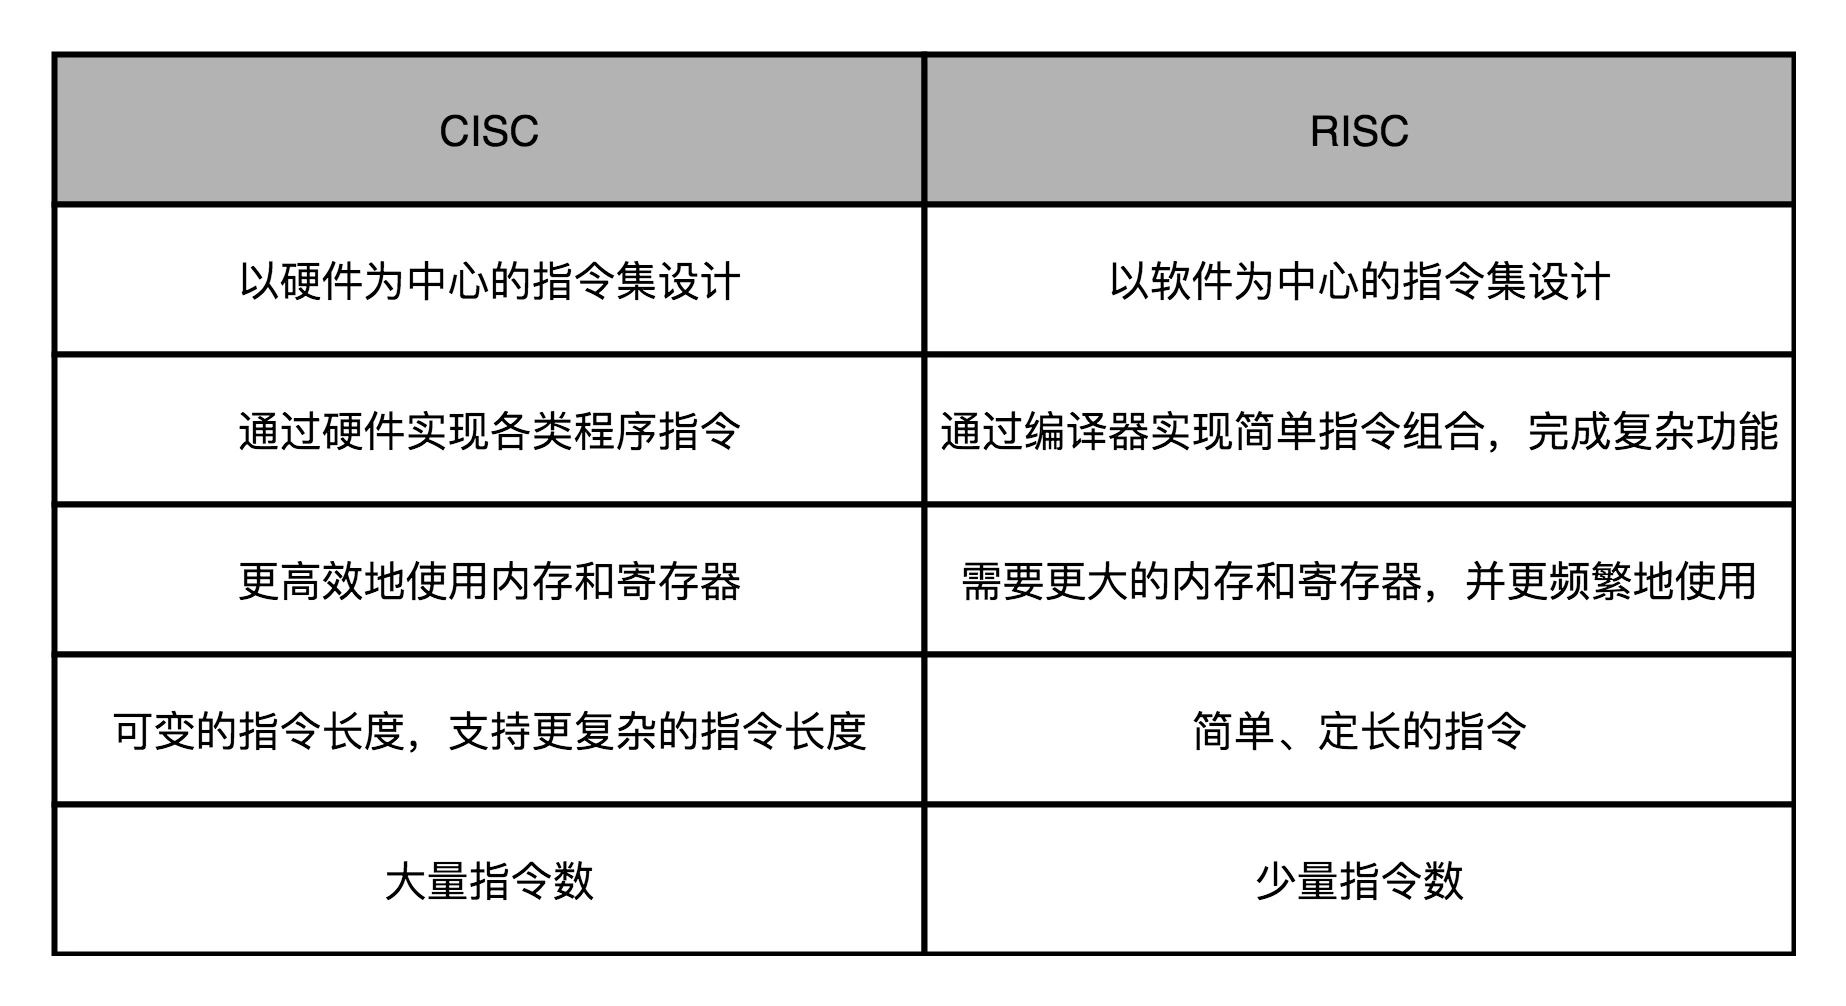 https://img.zhaoweiguo.com/knowledge/images/cores/composition-principles/RISC1.jpeg